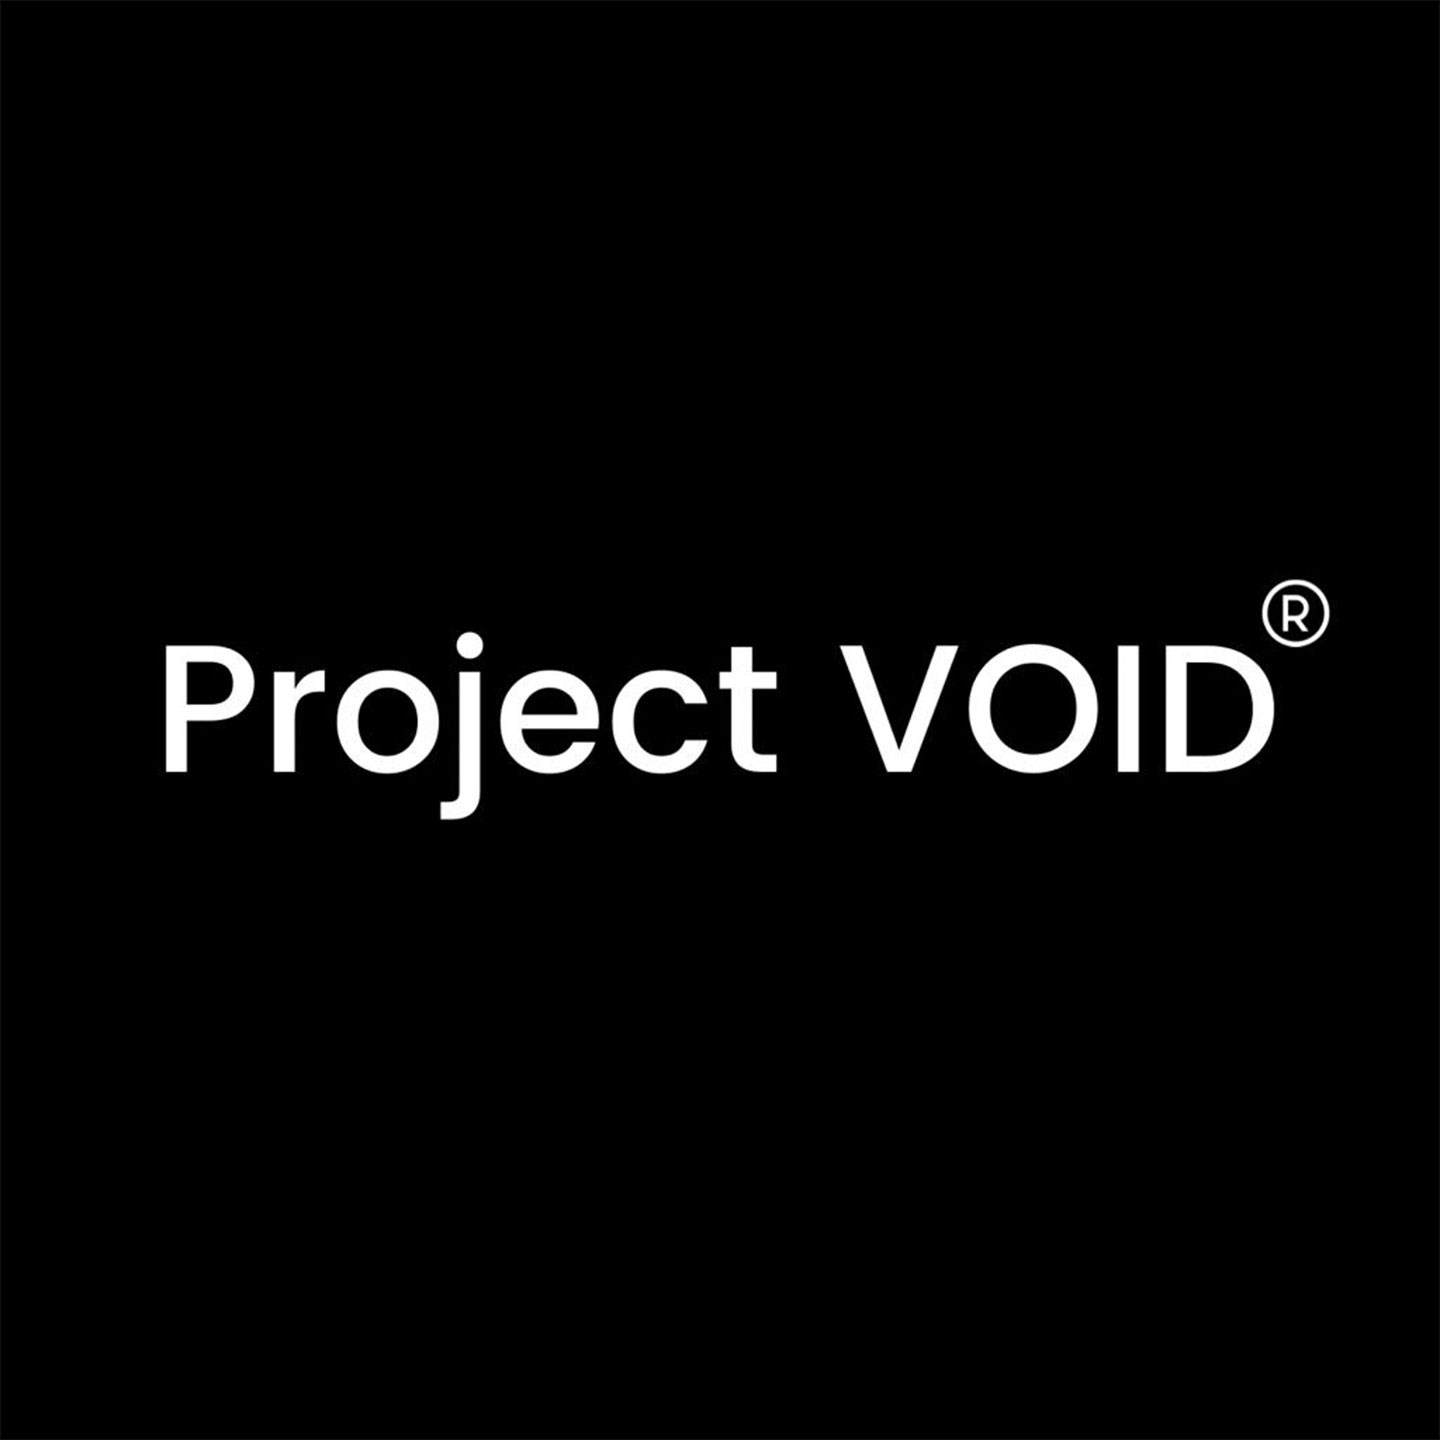 The Void (Profile Background) 